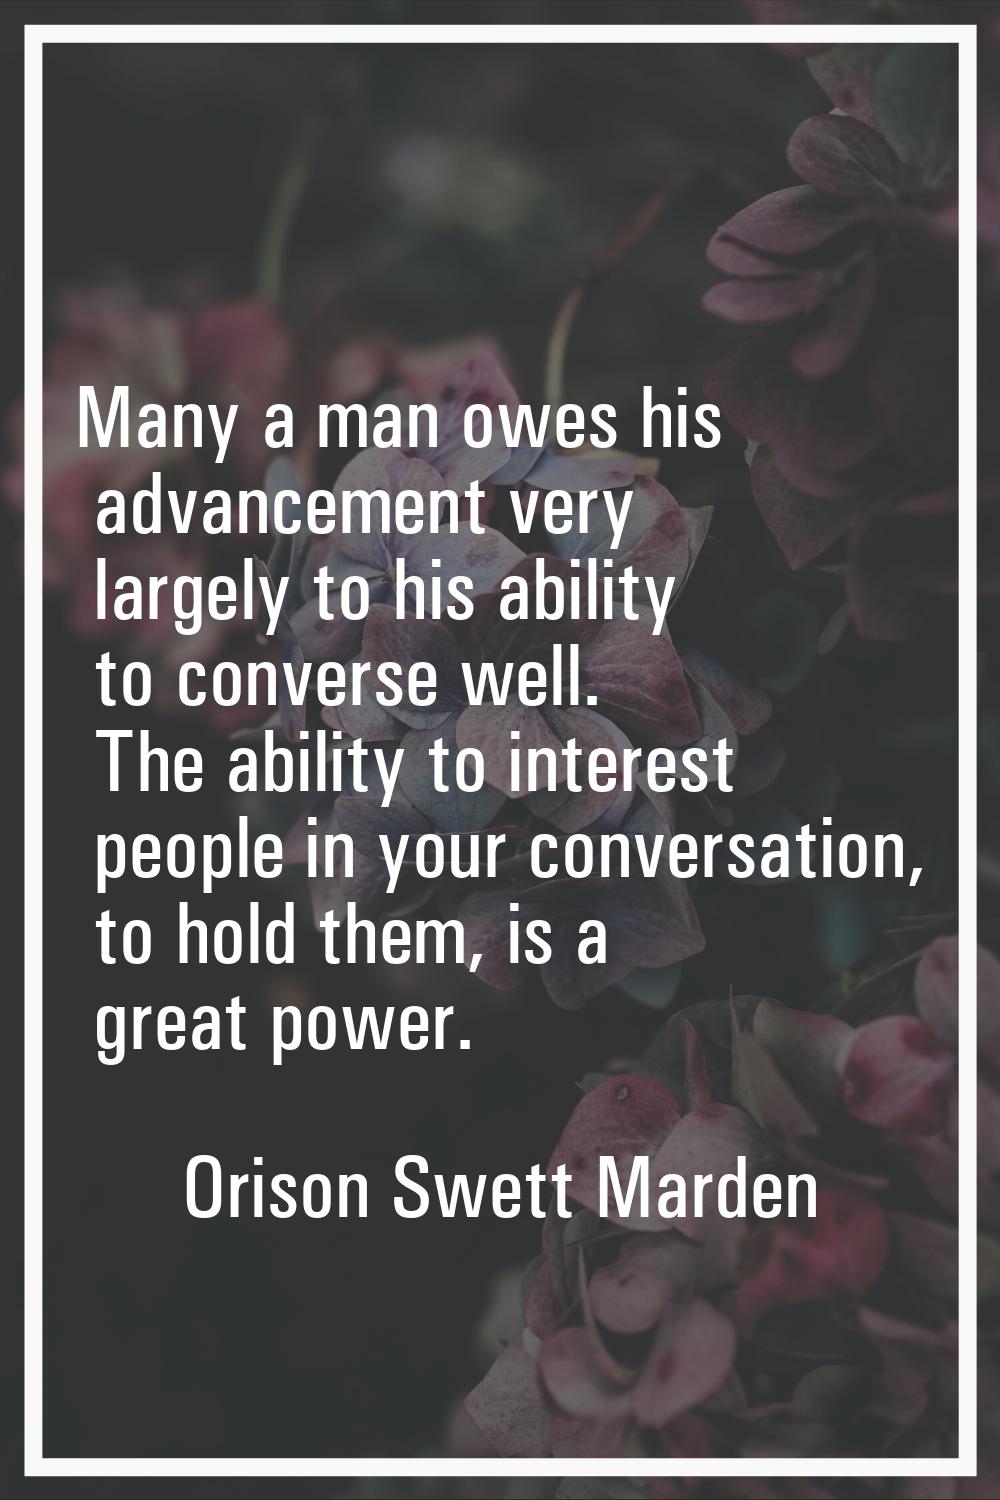 Many a man owes his advancement very largely to his ability to converse well. The ability to intere